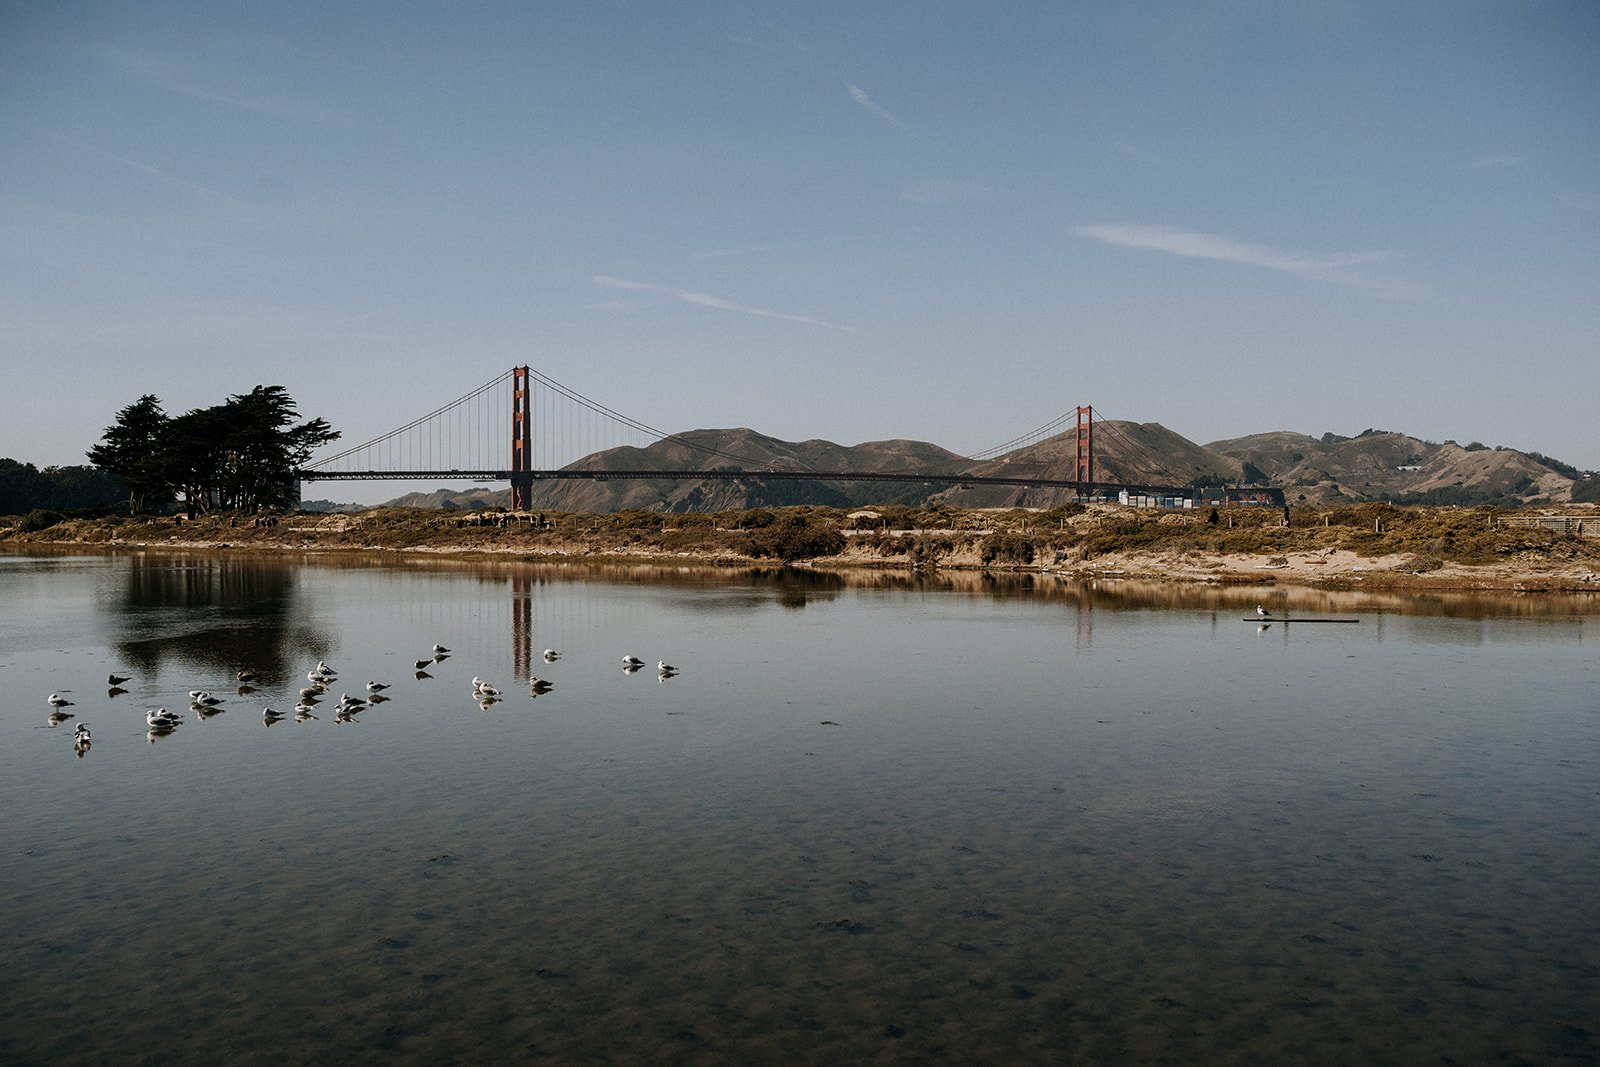  a pond across from the golden gate bridge  